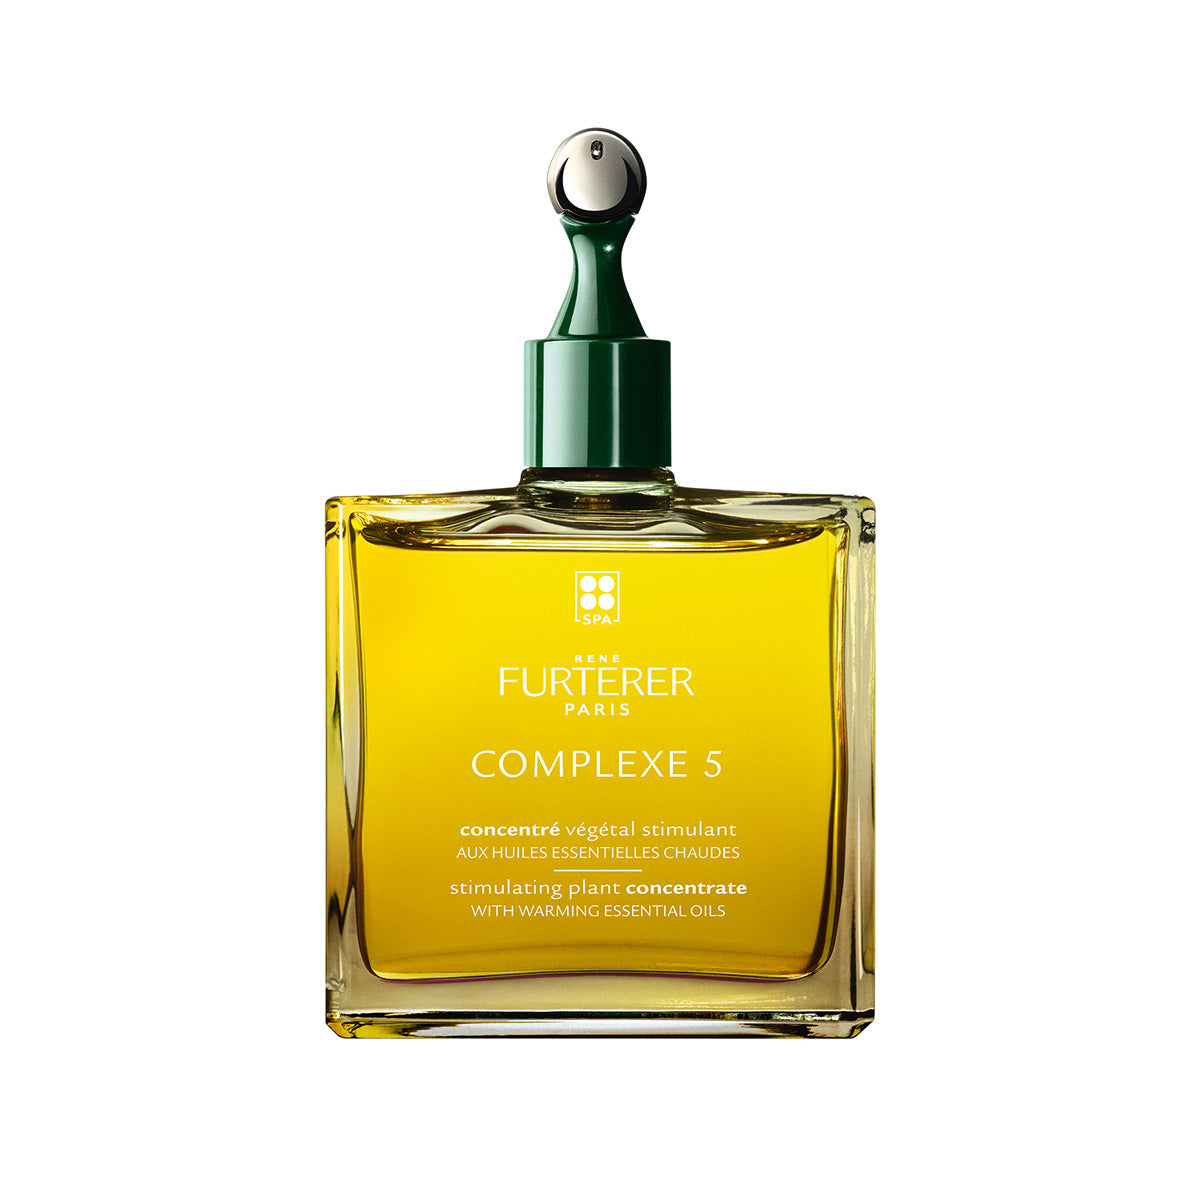 Rene Furtere|Complexe 5 Stimulating Plant extract with essential oils 50ml